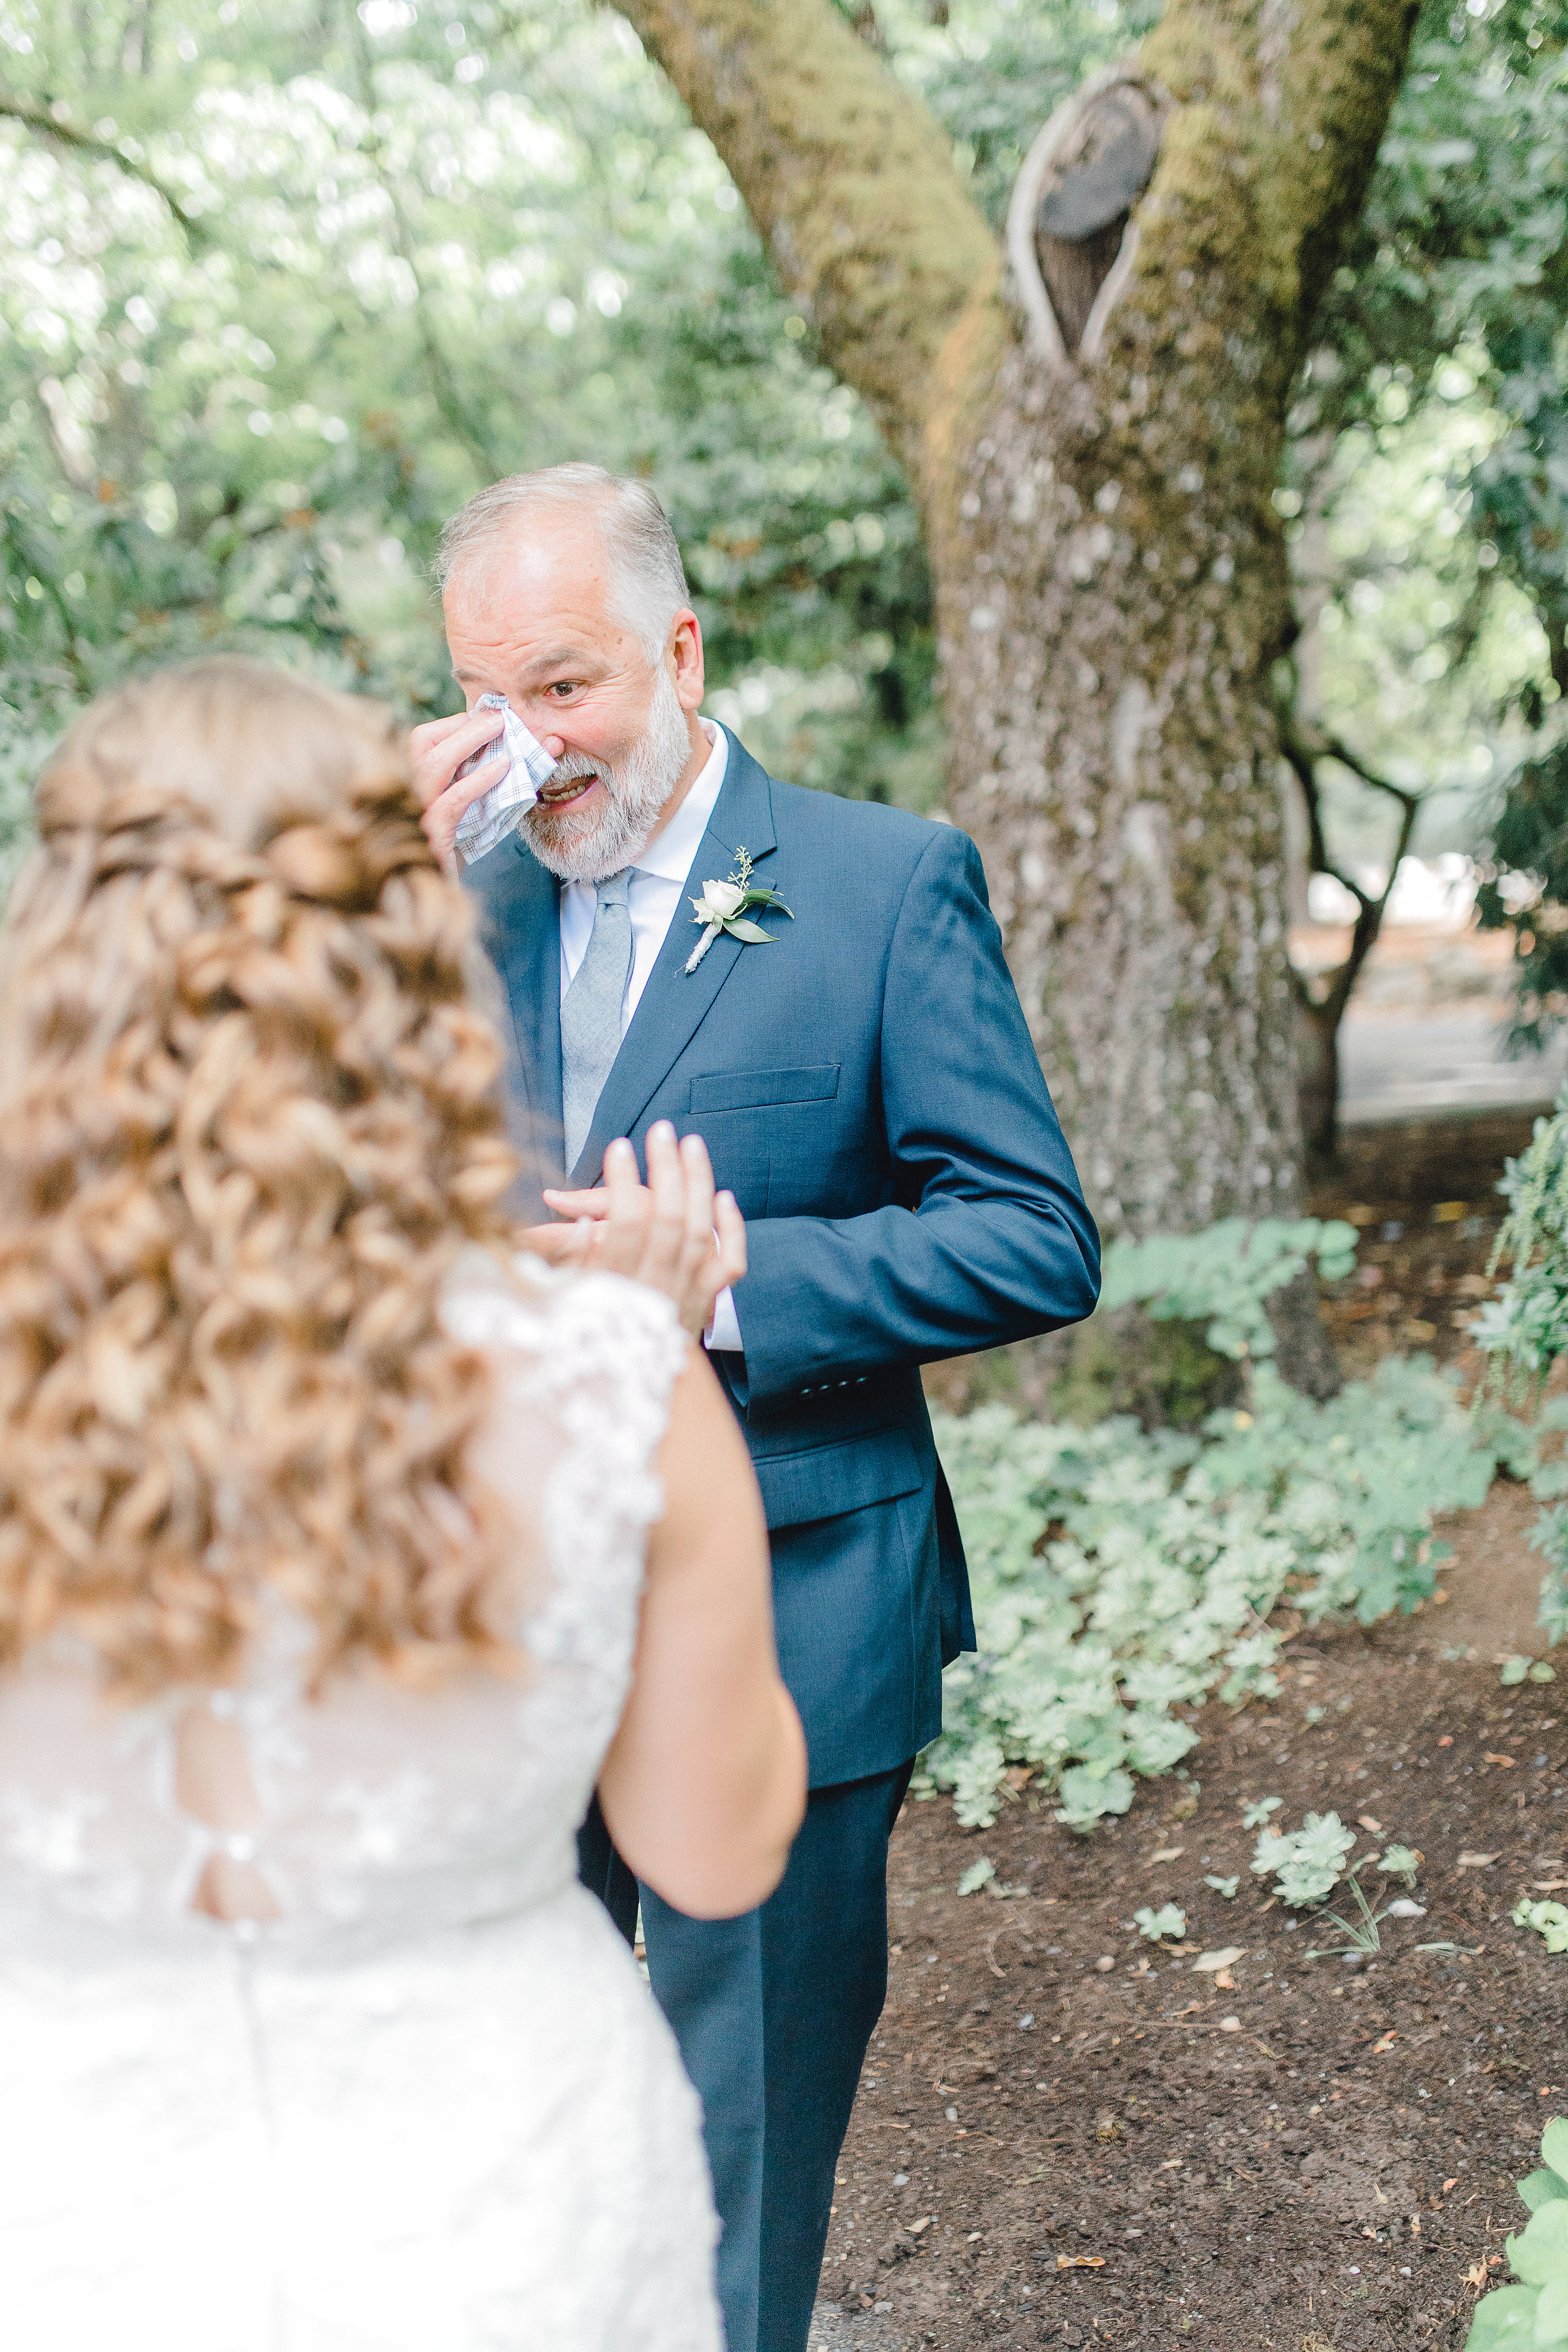 Seattle wedding, Washington wedding, bride and groom, PNW wedding, wedding inspiration, Seattle bride, first look, father daughter first look, dad first look